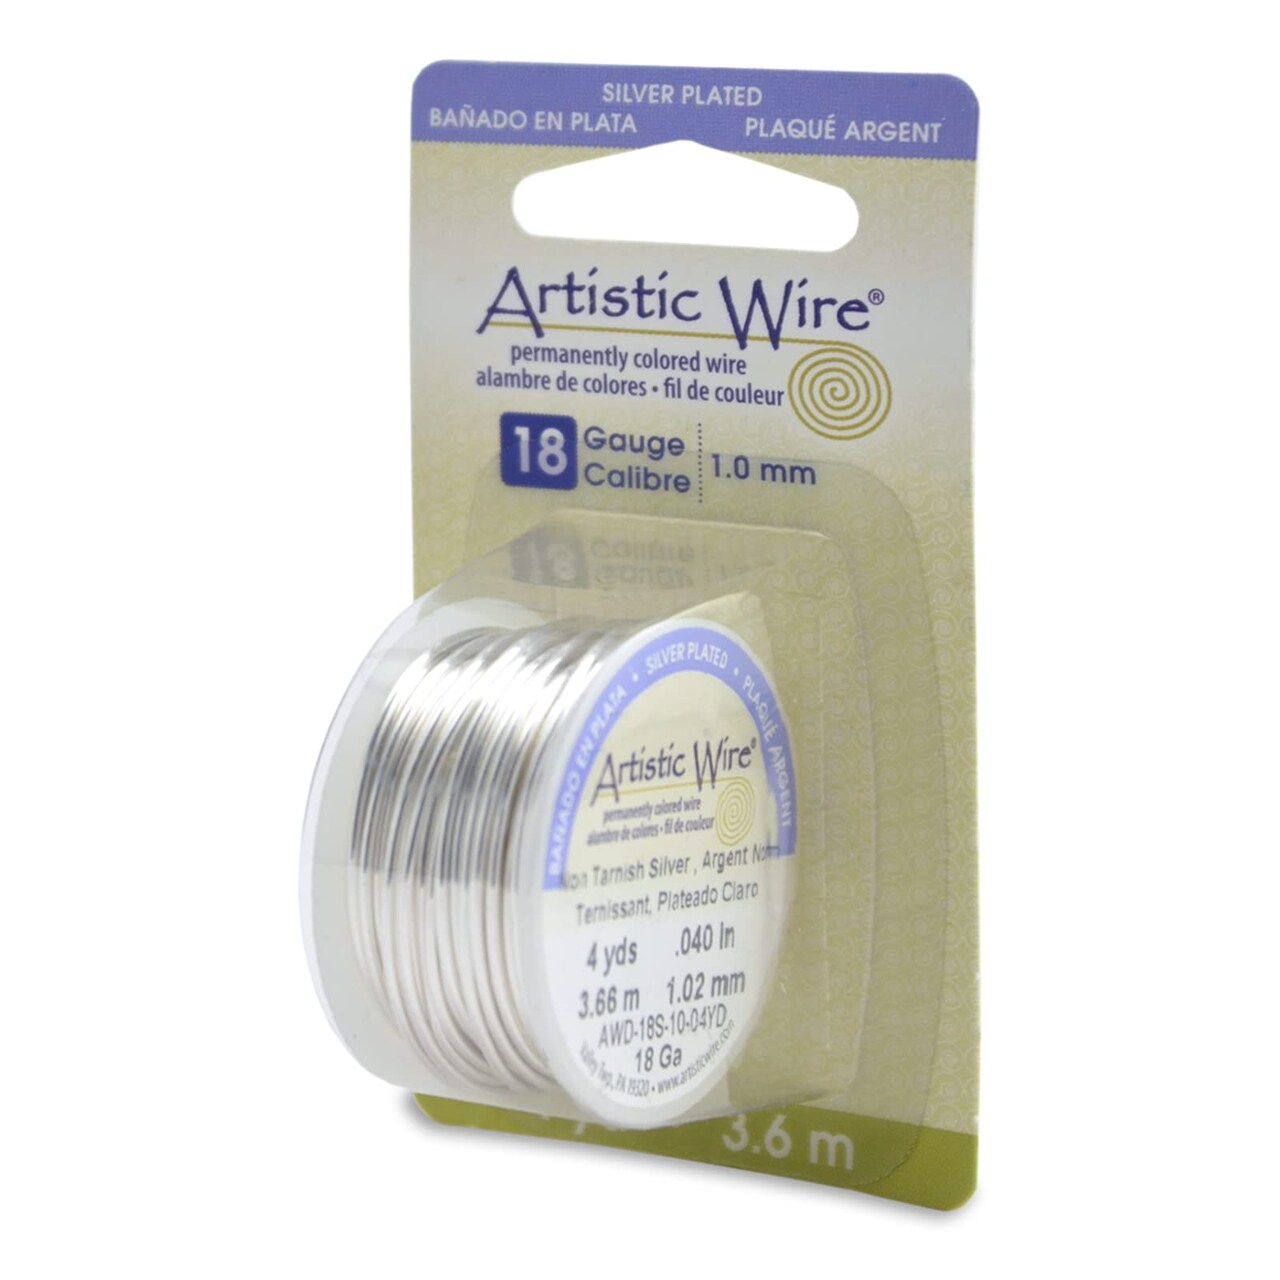 Artistic Wire Silver Plated Wire Dispenser Pack - 18 20 22 24 26 28 30 32  34 Gauge Wire for Beading and Jewelry Making Crafts, Bendable Shaping  Wrapping Wire for Crystals, Rings, Bracelets